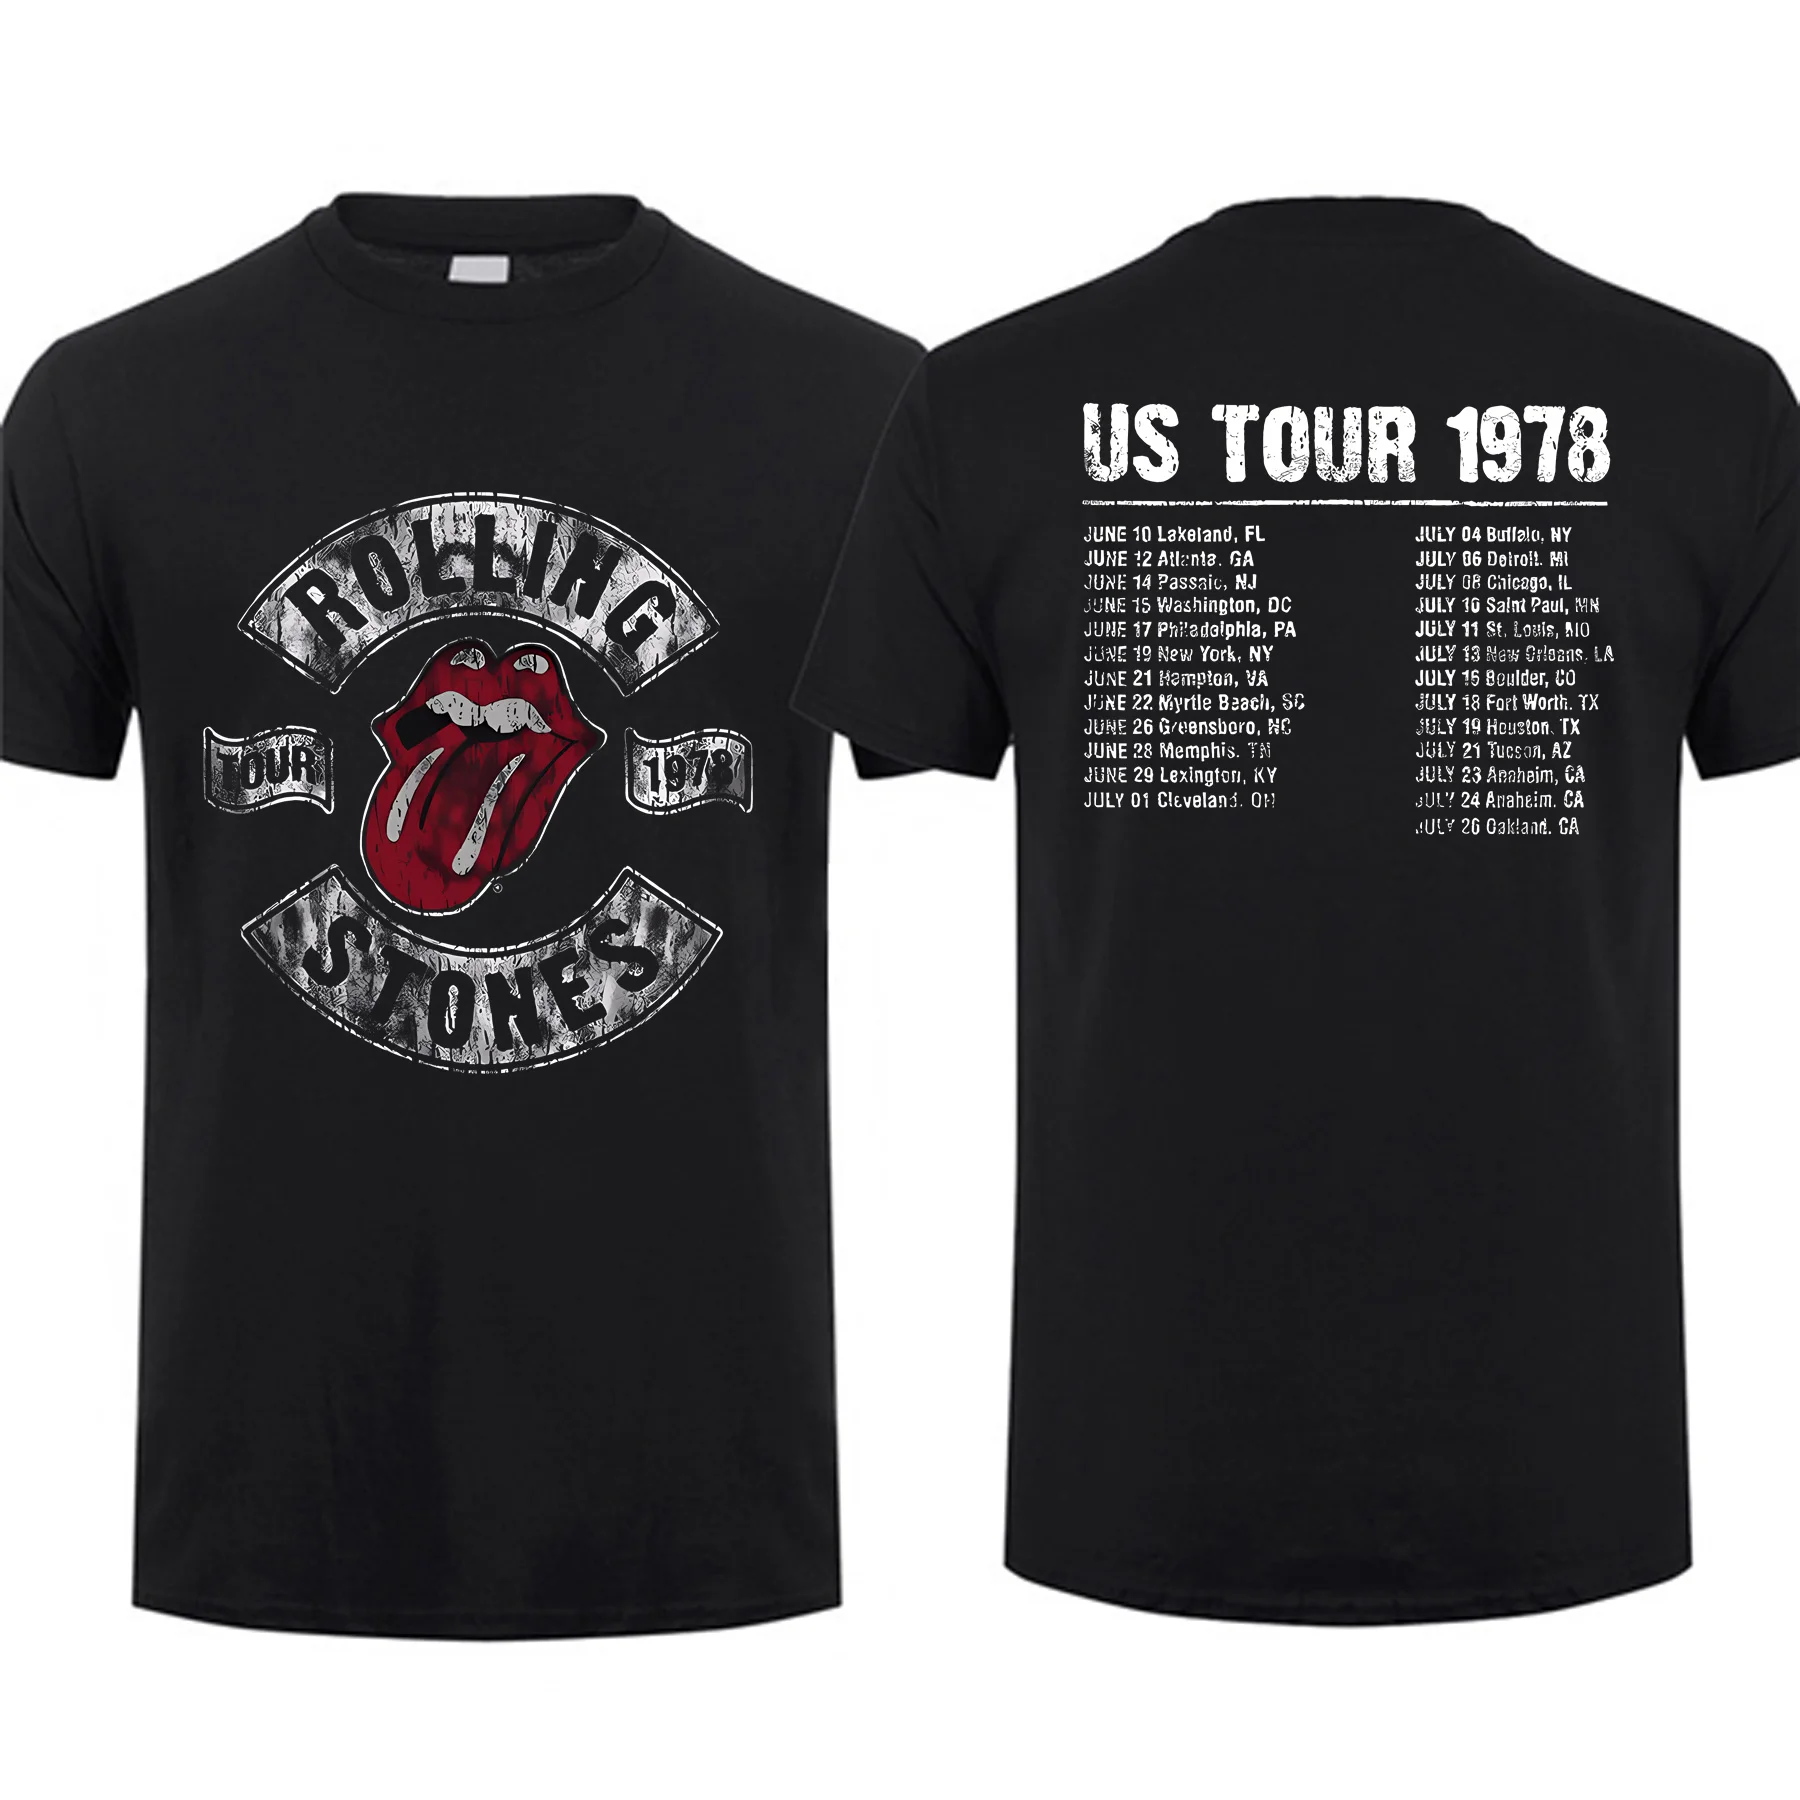 

Amazing Tees Men The Rolling Stones US Tour 1978 Music T Shirt Double-sided Casual Oversized T-shirt Graphic Short Sleeve S-3XL